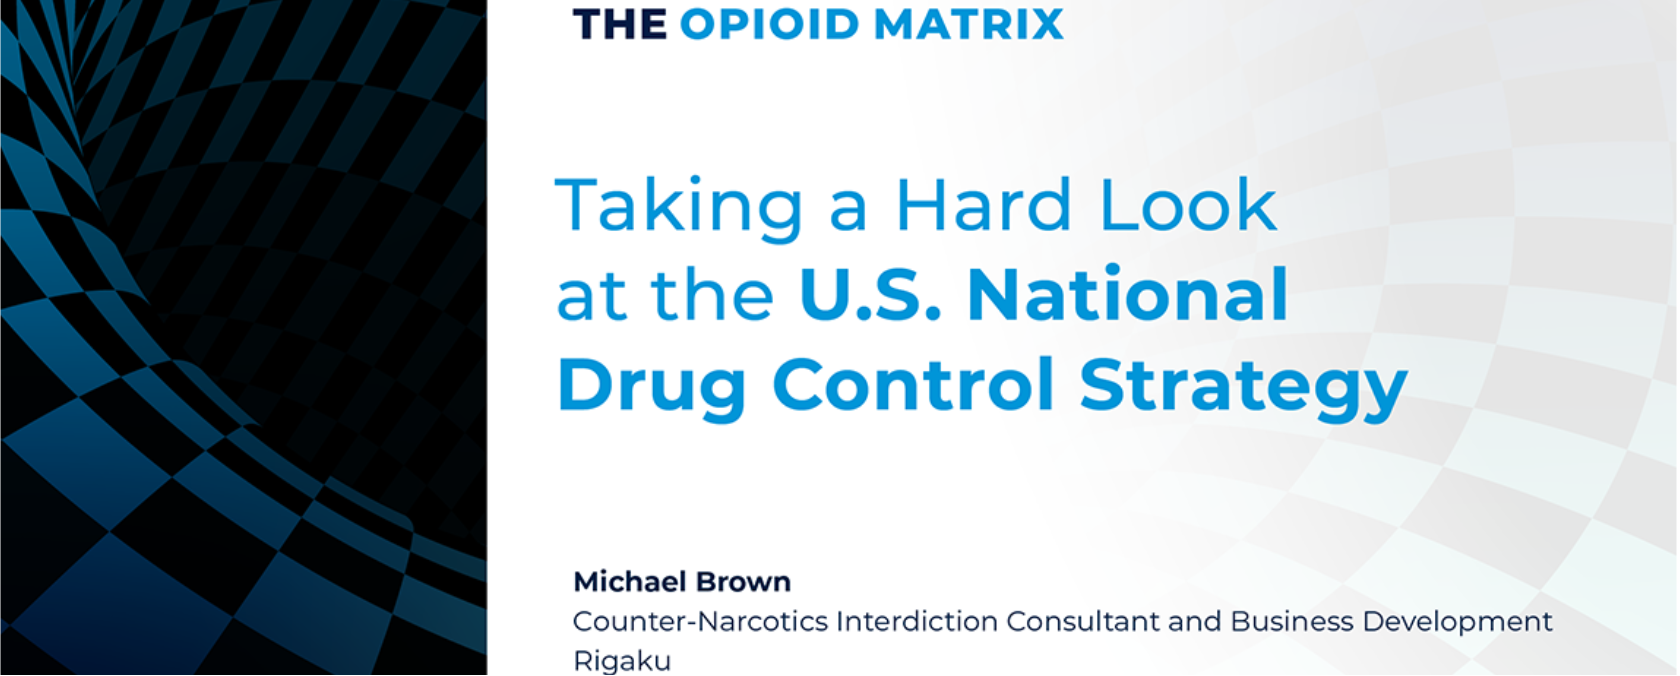 Taking a Hard Look at the U.S. National Drug Control Strategy